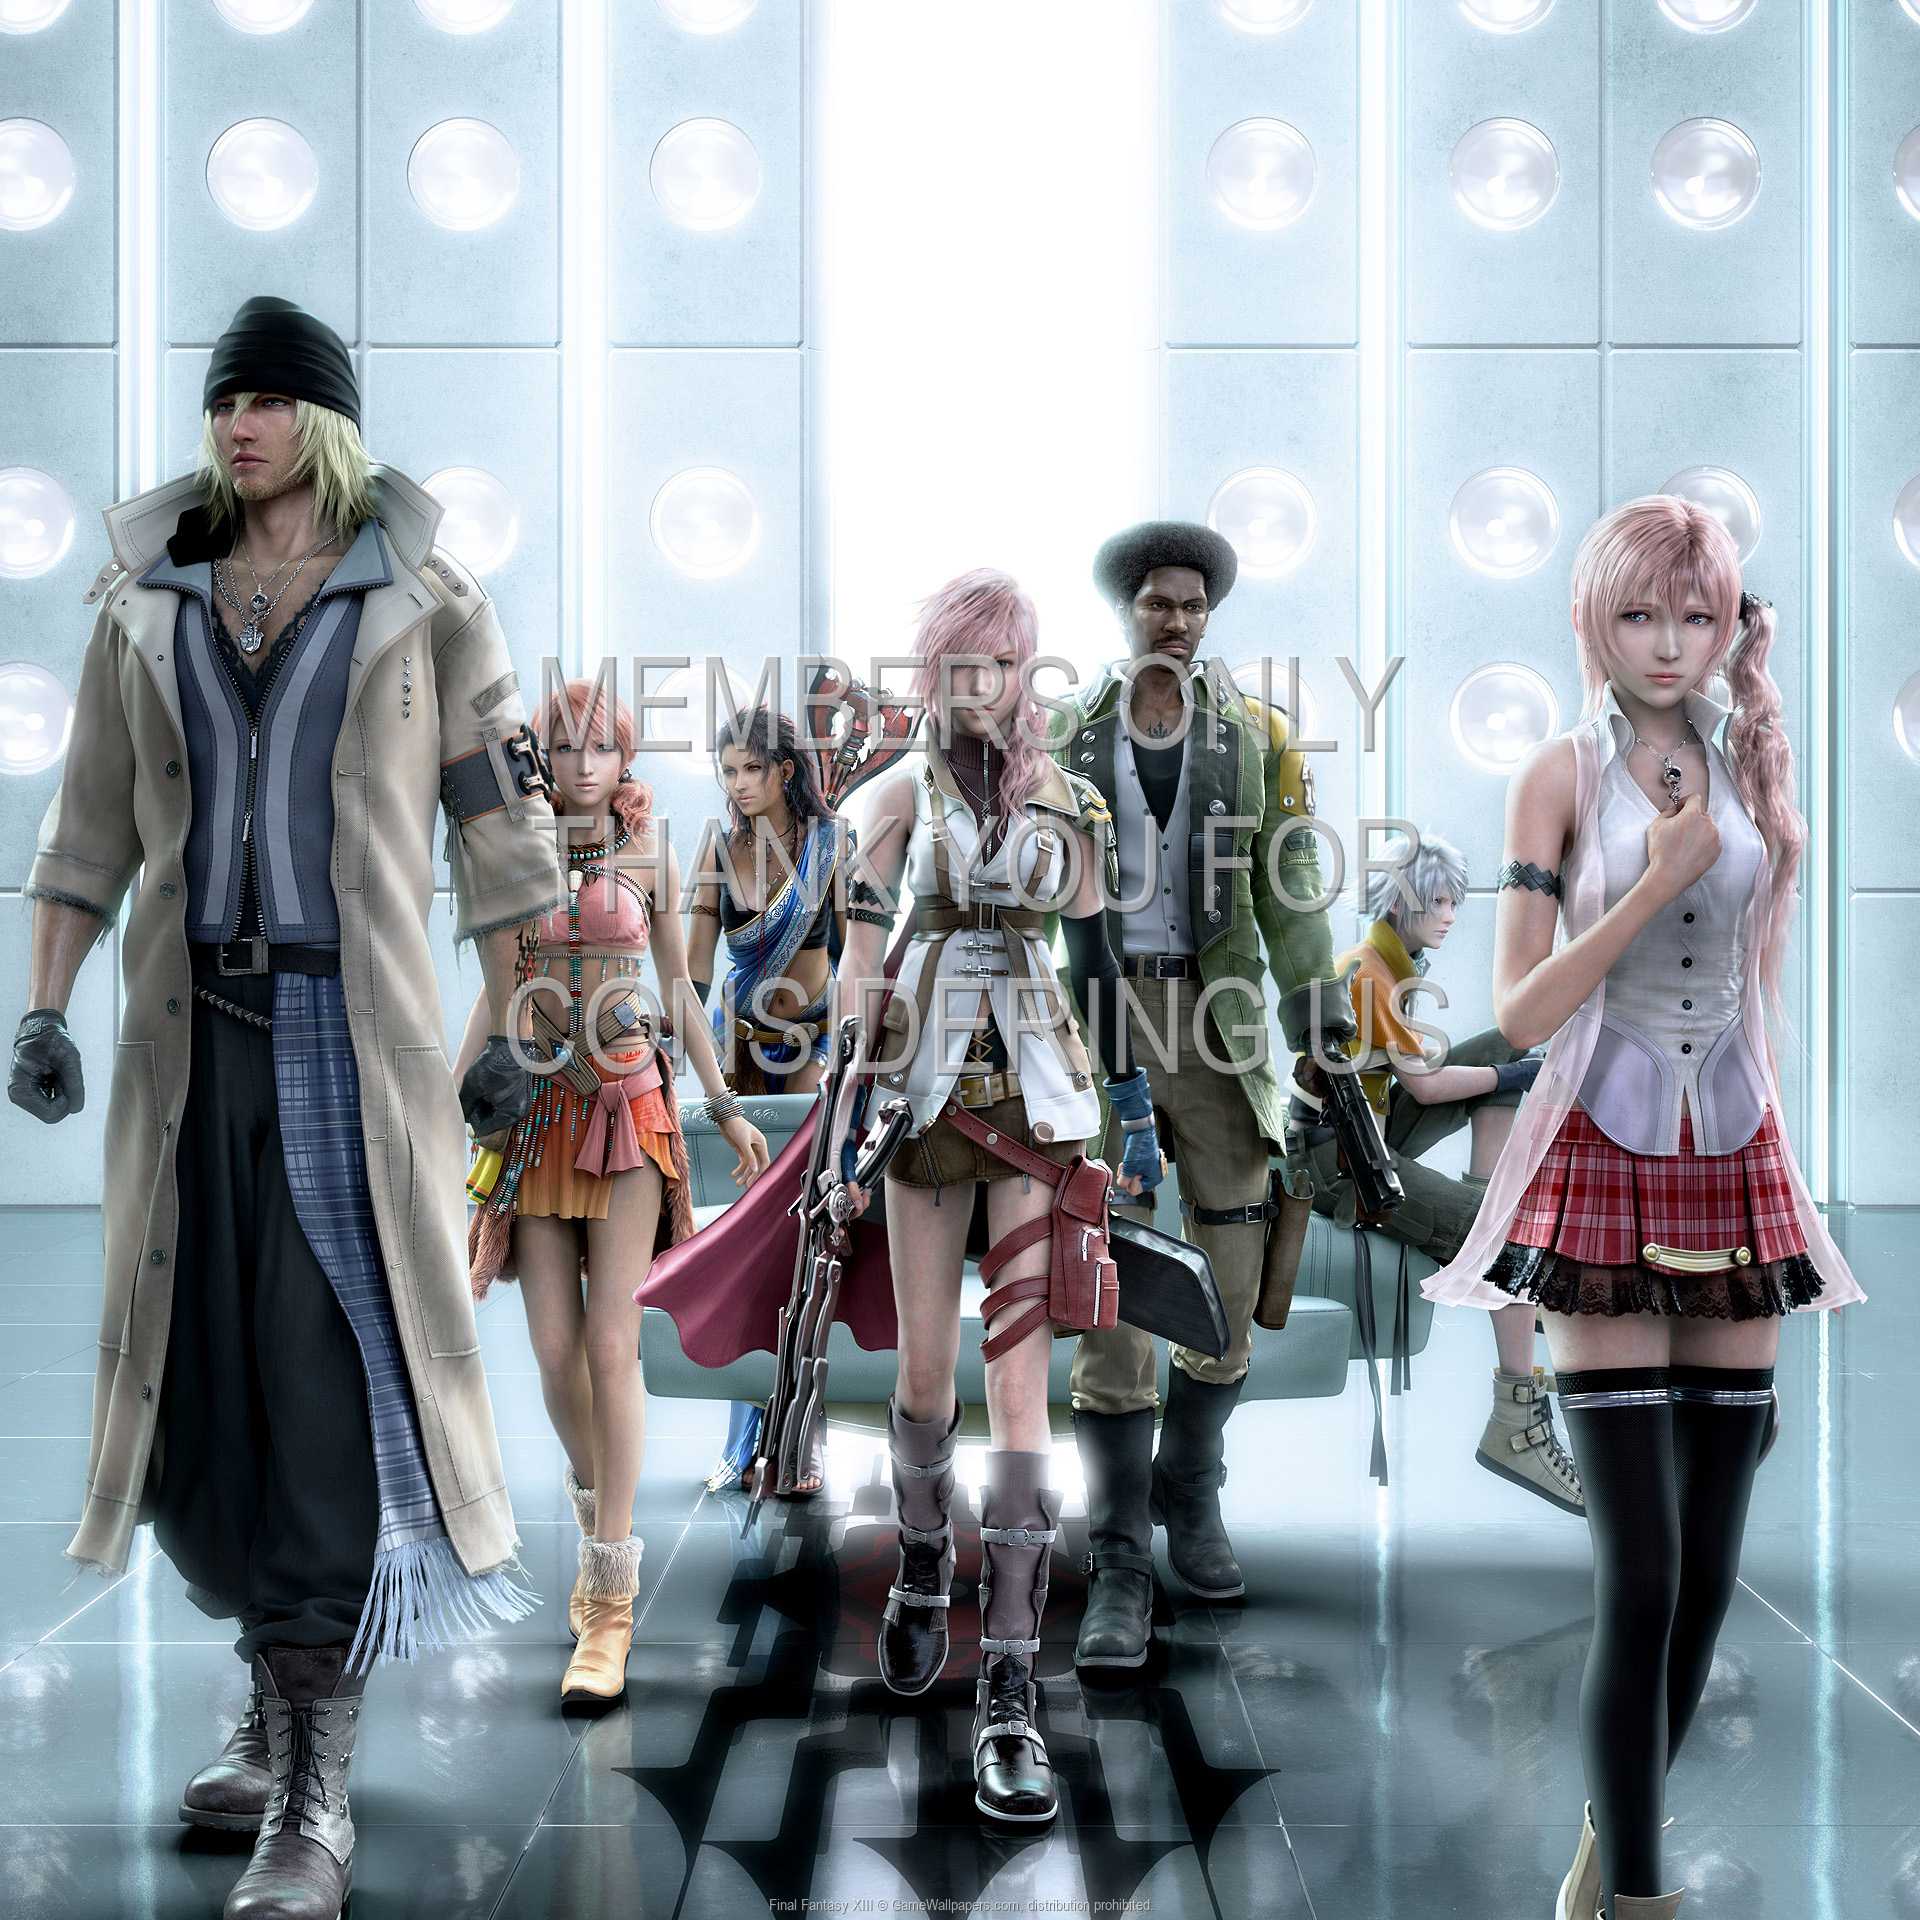 Final Fantasy XIII 1080p Horizontal Mobile wallpaper or background 12